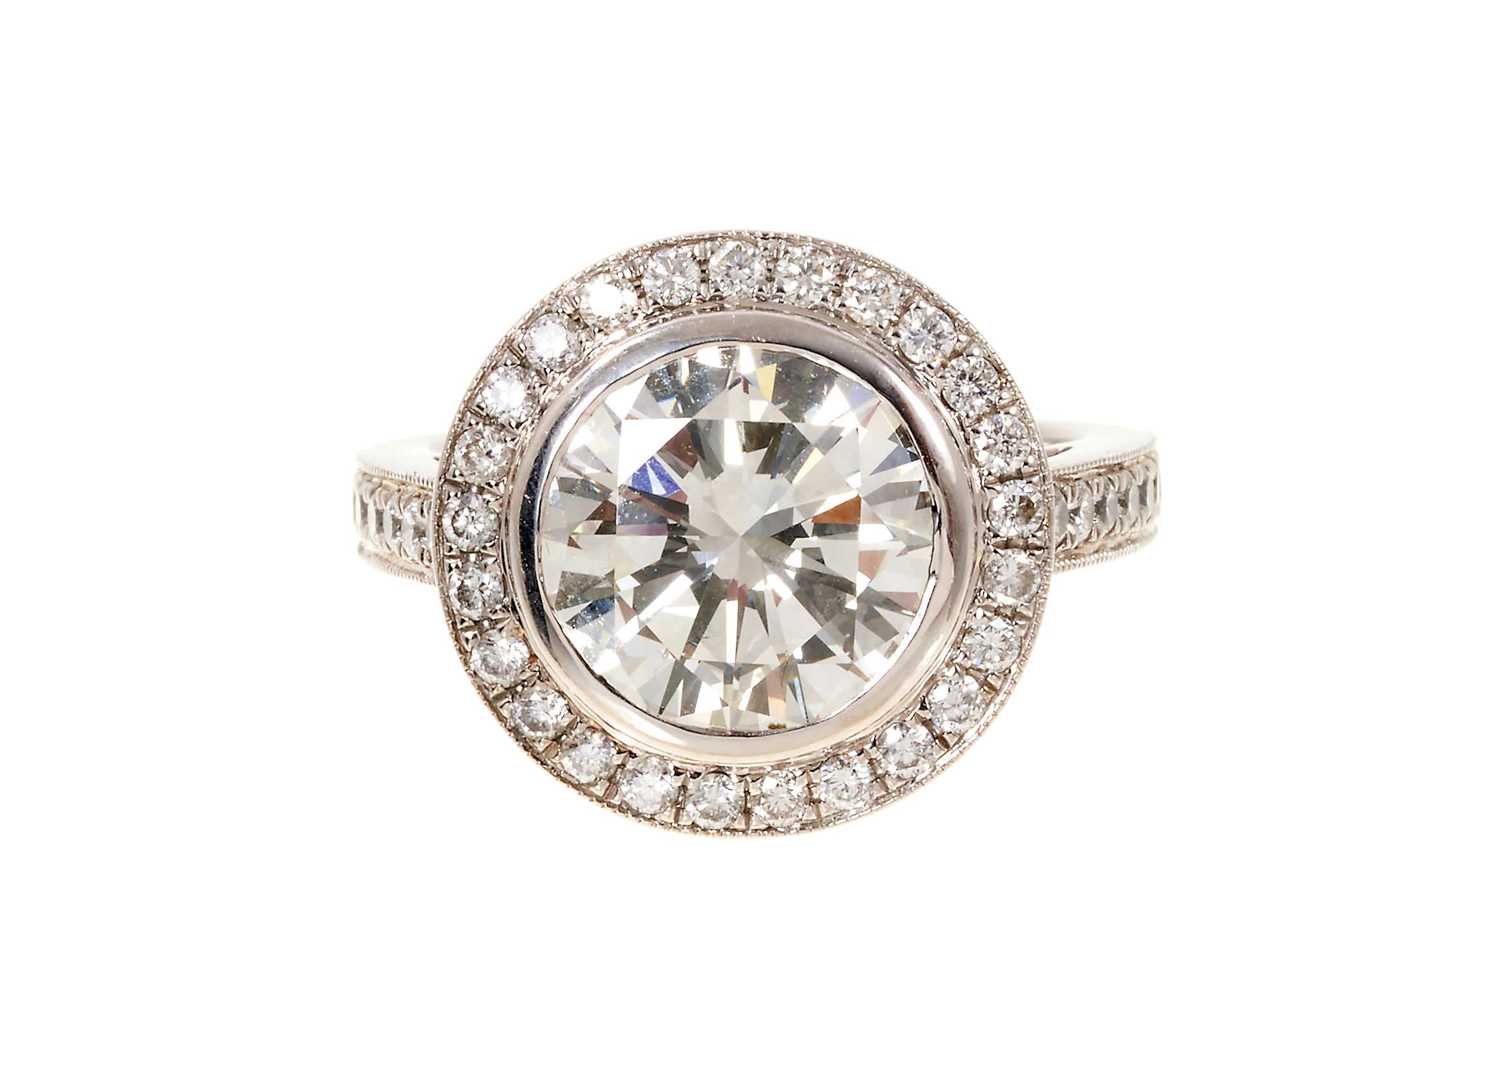 Lot 692 - Fine diamond single stone ring, the round brilliant cut diamond weighing 3.38 carats, in a rub-over setting, surrounded by a border of twenty-five brilliant cut diamonds with fourteen diamonds to t...